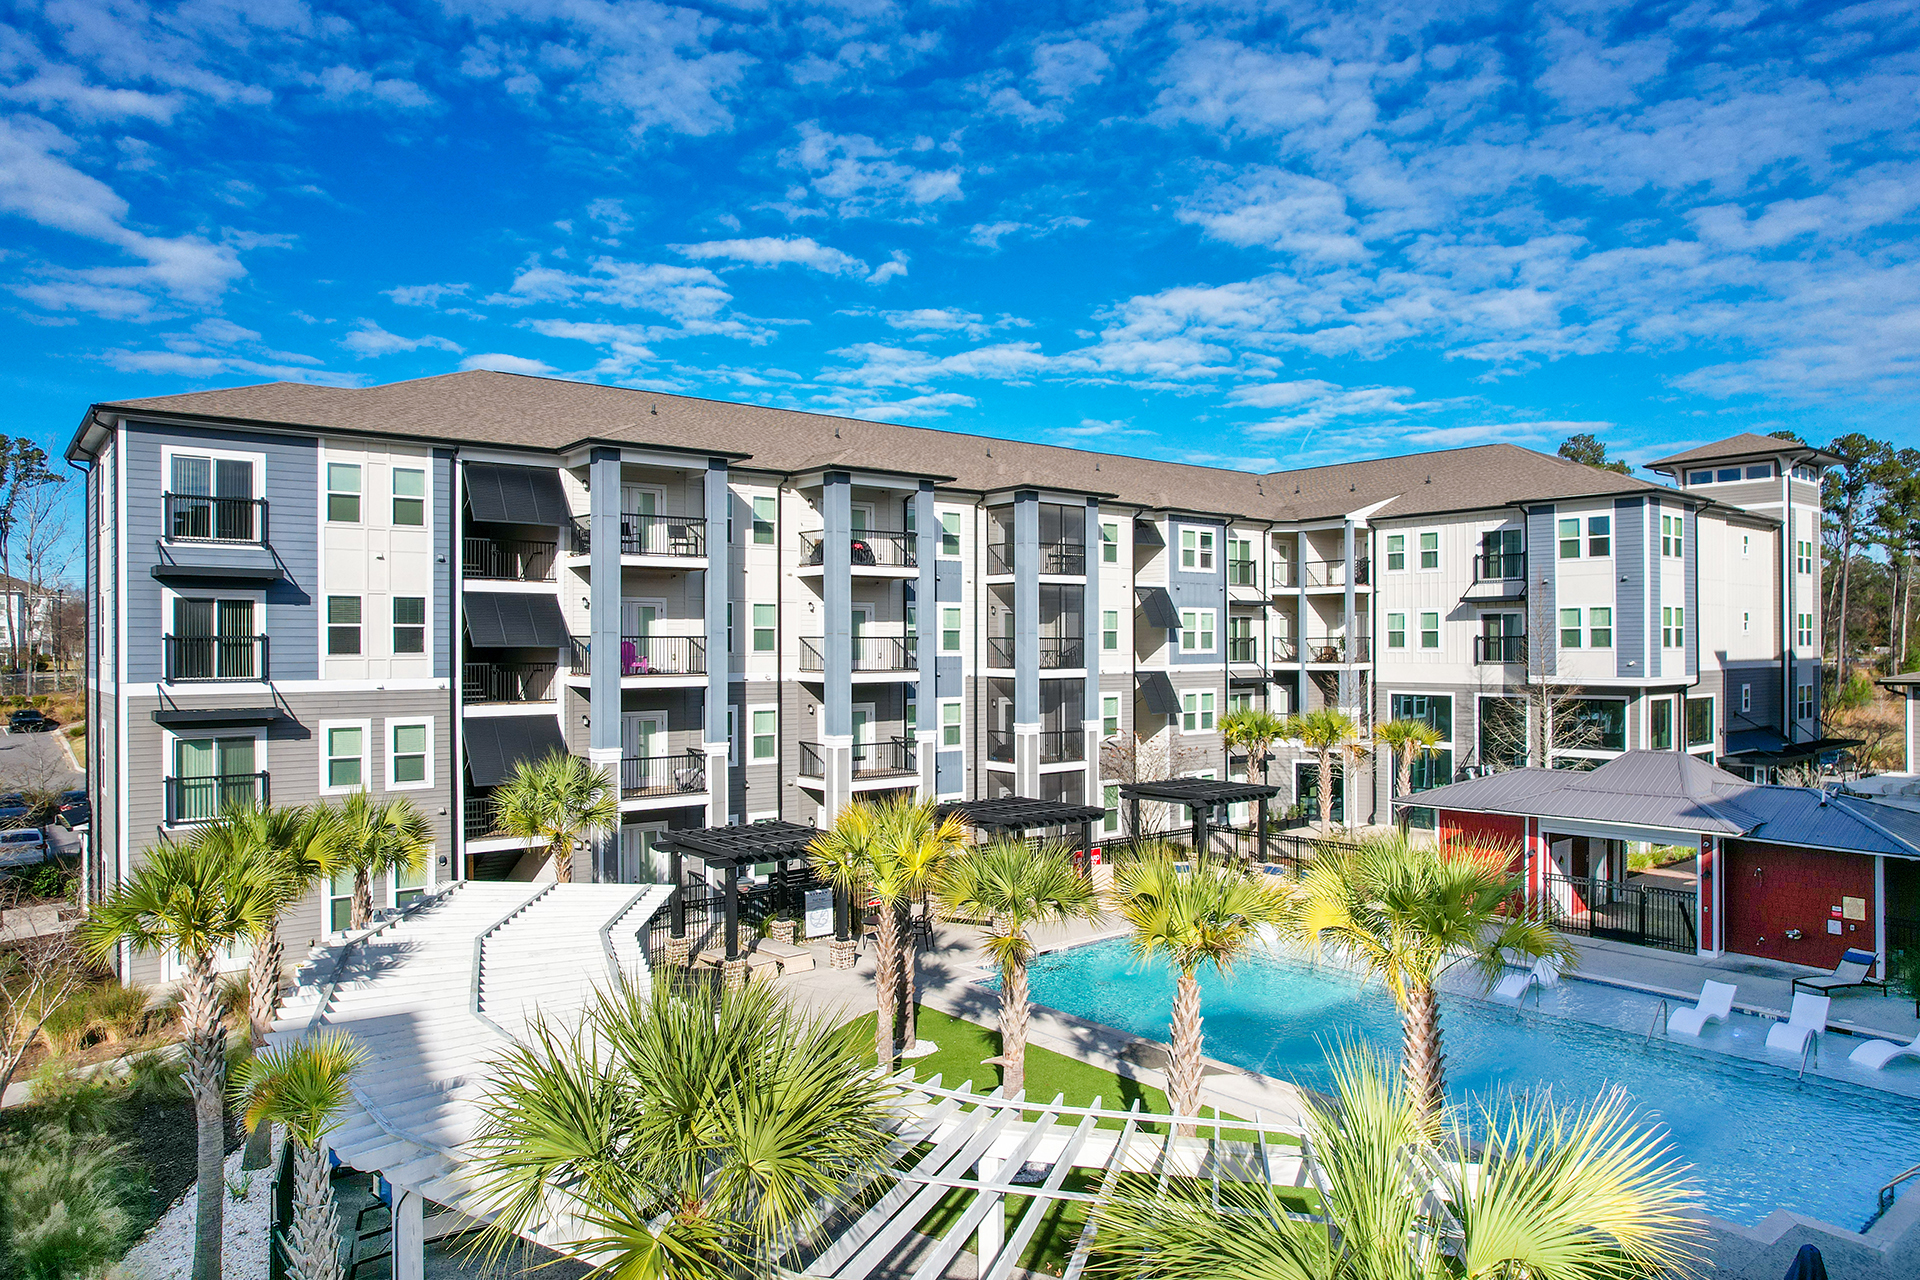 A four-story apartment building with balconies overlooks a swimming pool, surrounded by palm trees and lounge areas, under a bright blue sky—a prime example of multi-family real estate investments.